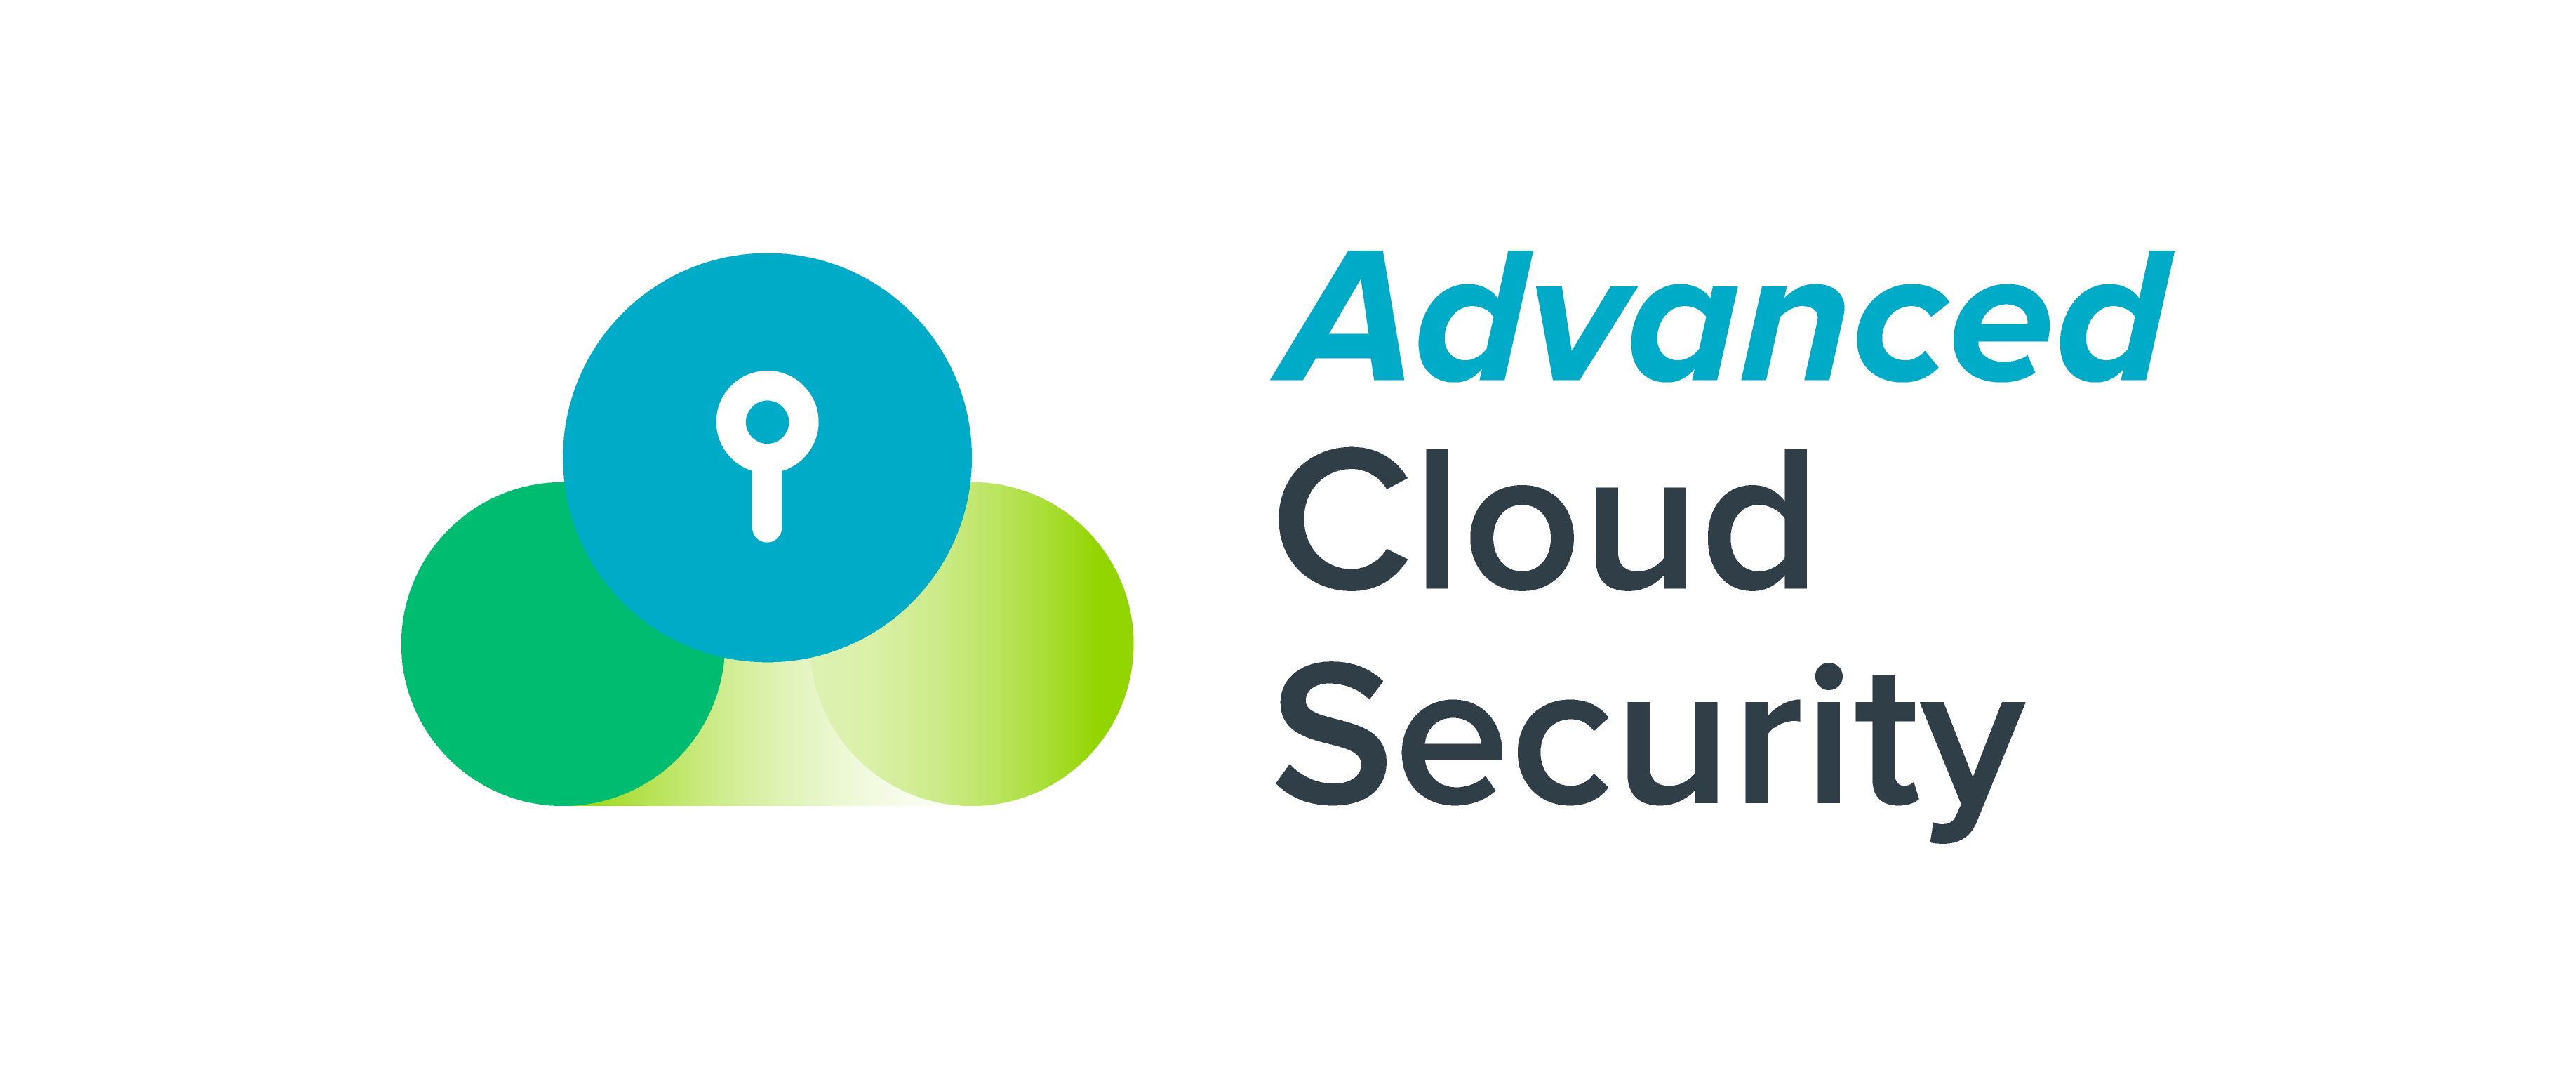 advanced cloud security app for dynamics 365 business central